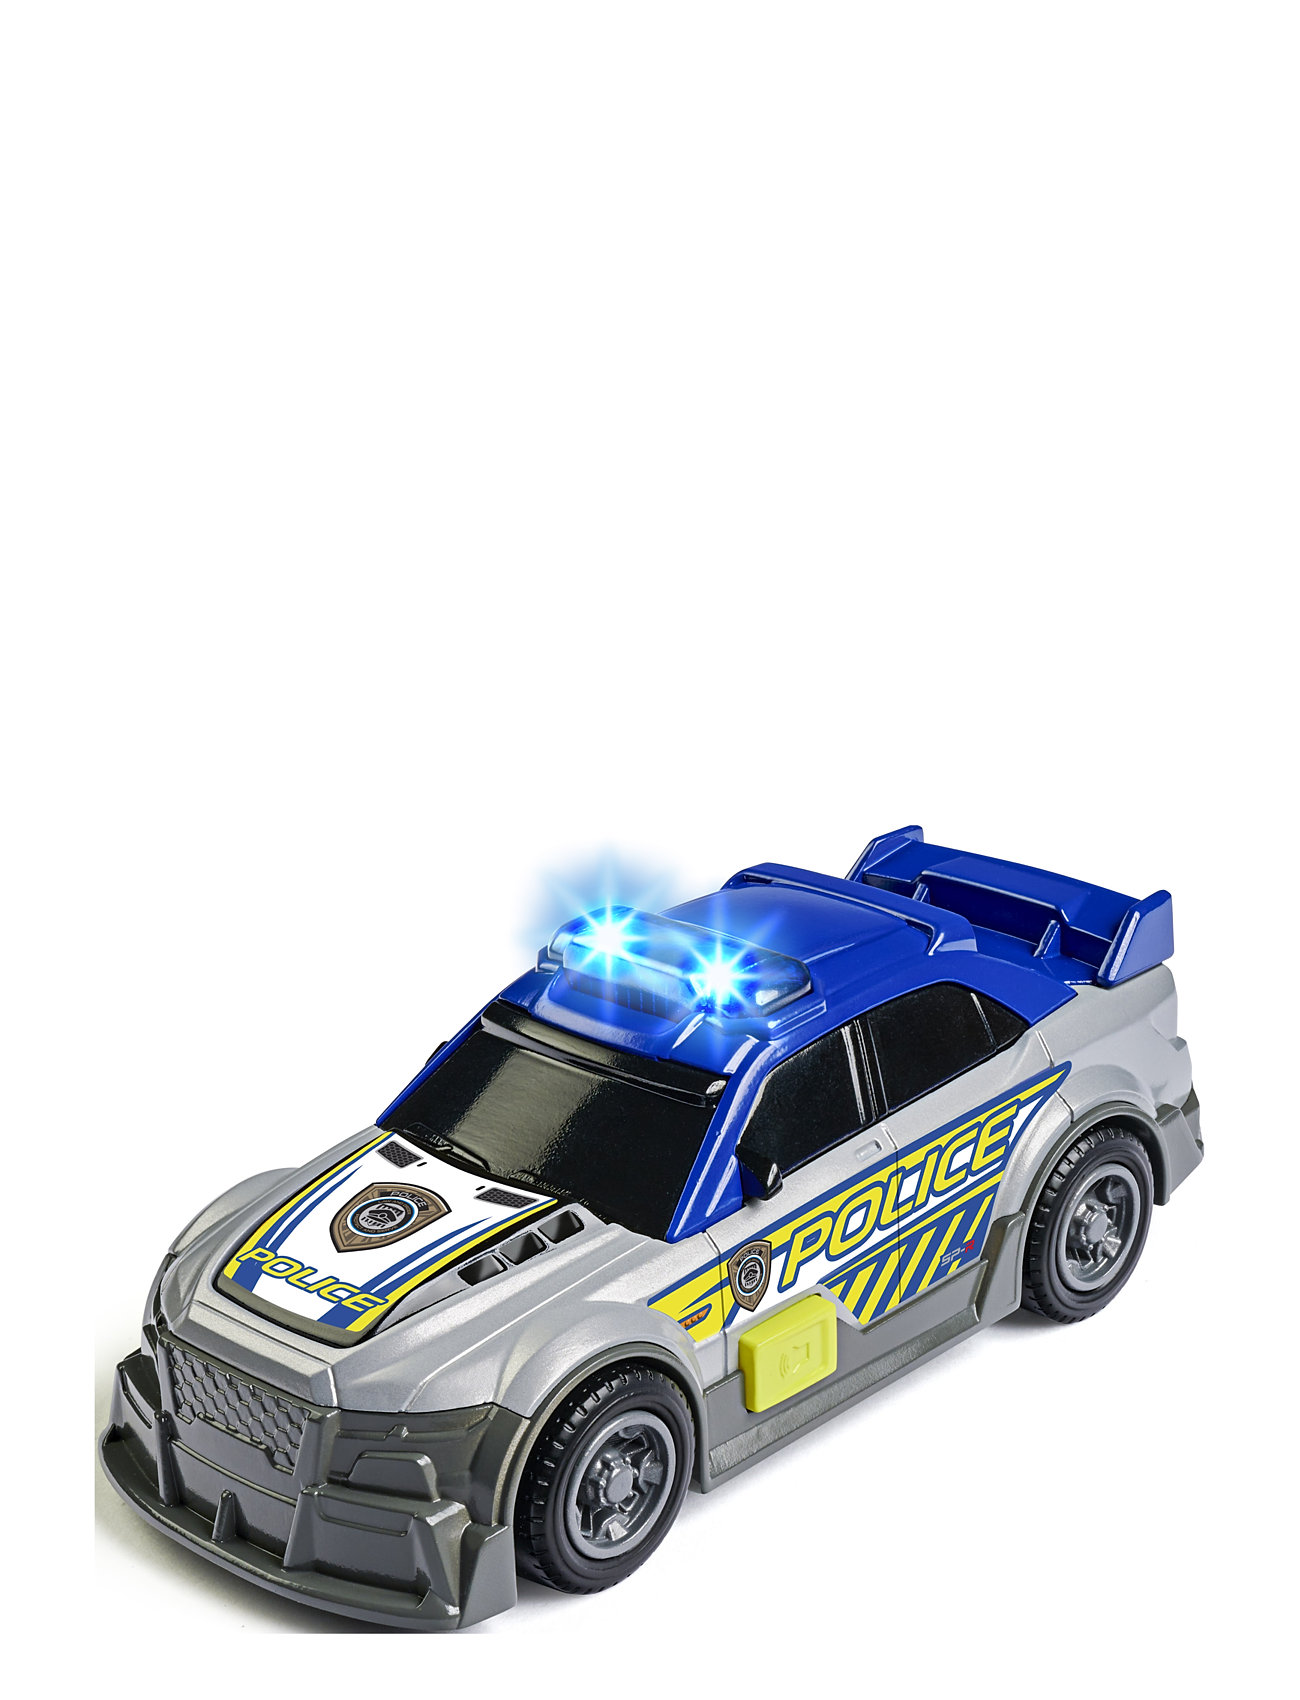 Police Car Toys Toy Cars & Vehicles Toy Cars Police Cars Multi/patterned Dickie Toys